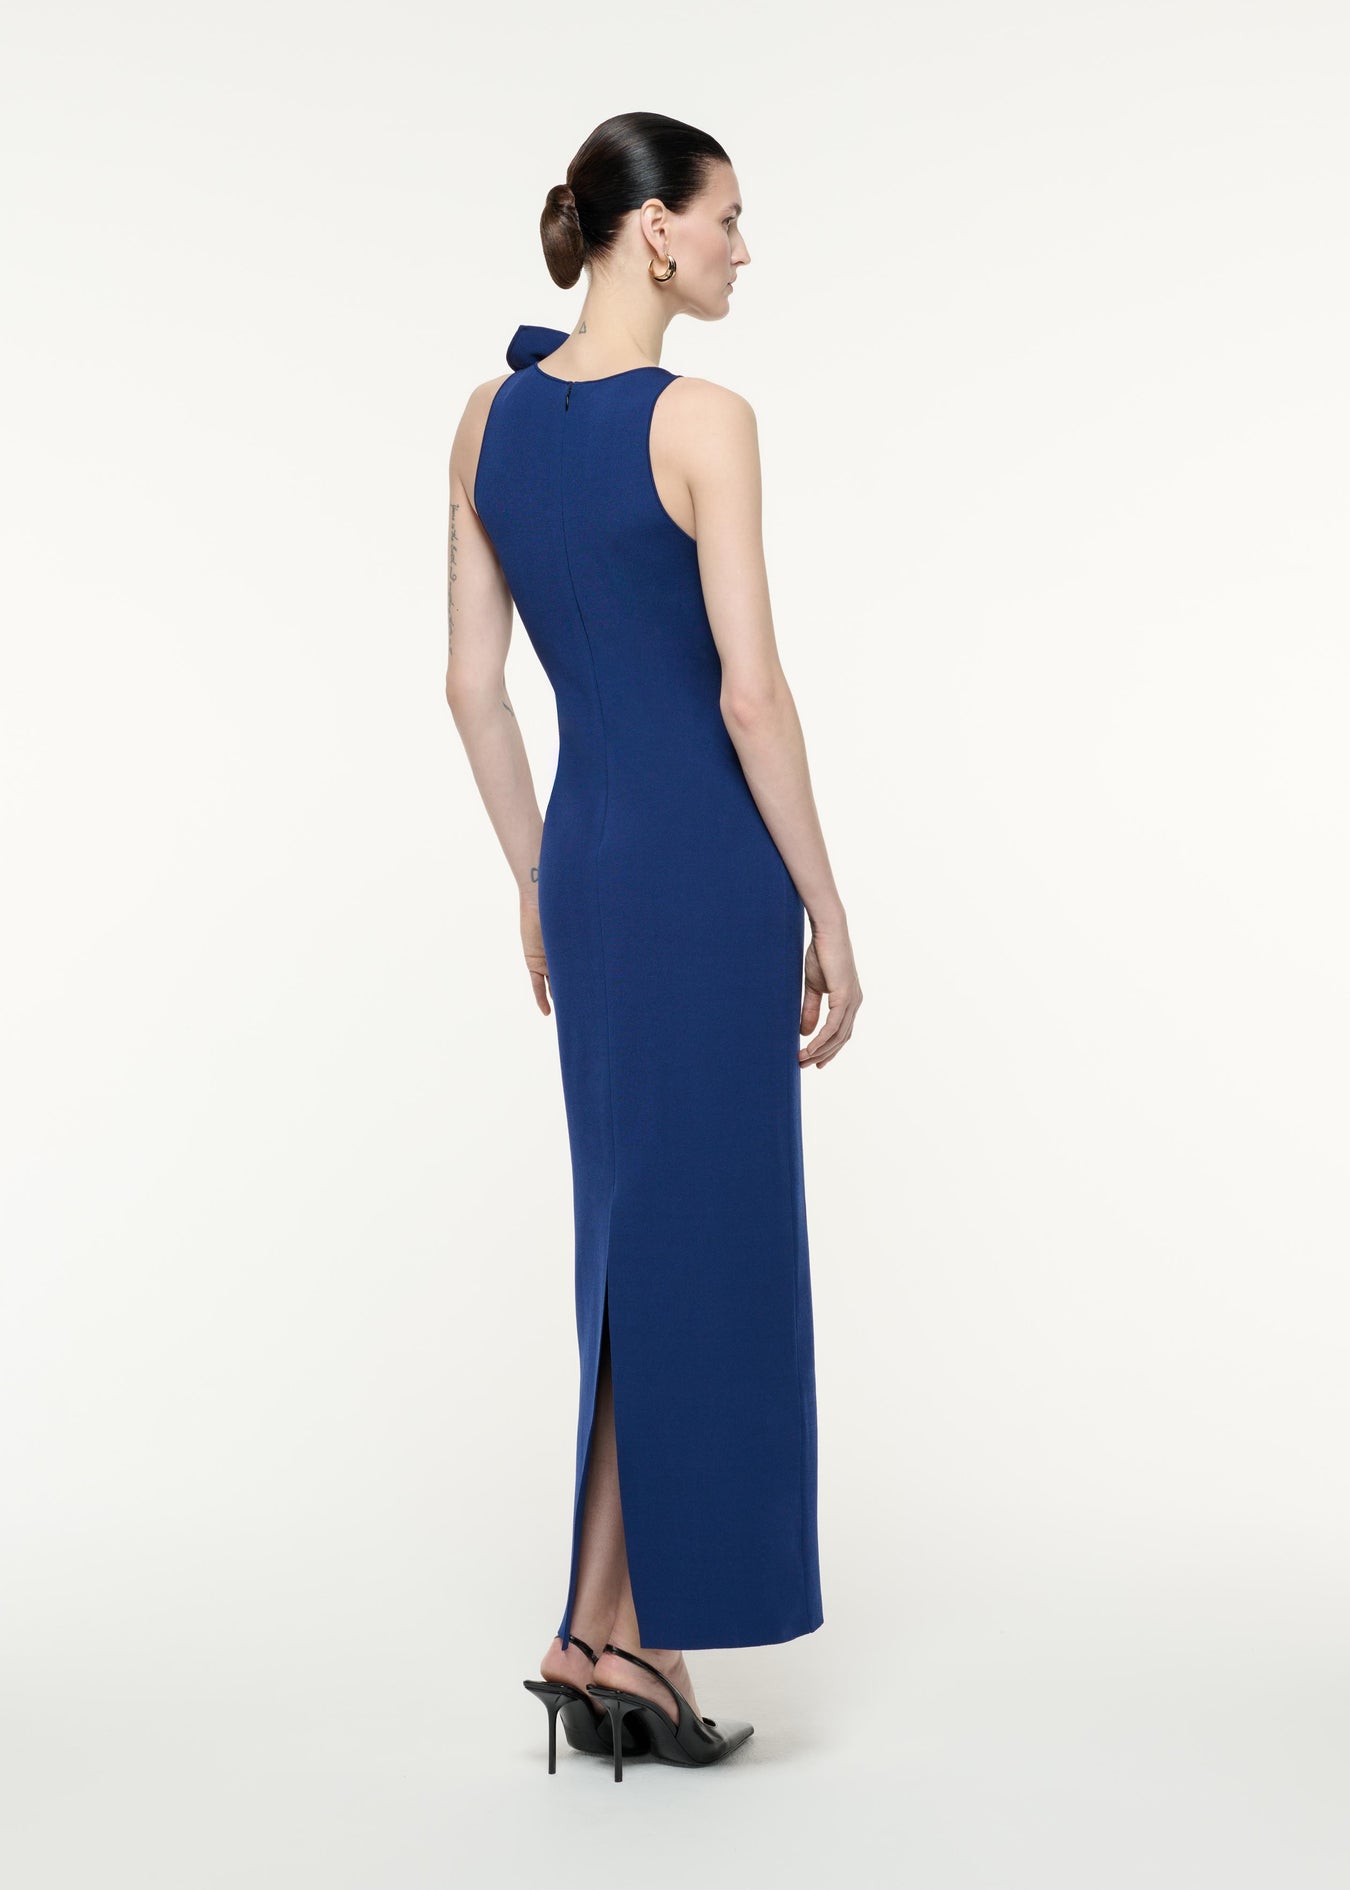 A back view image of a model wearing the Flat Knit Bow Max Dress in Navy